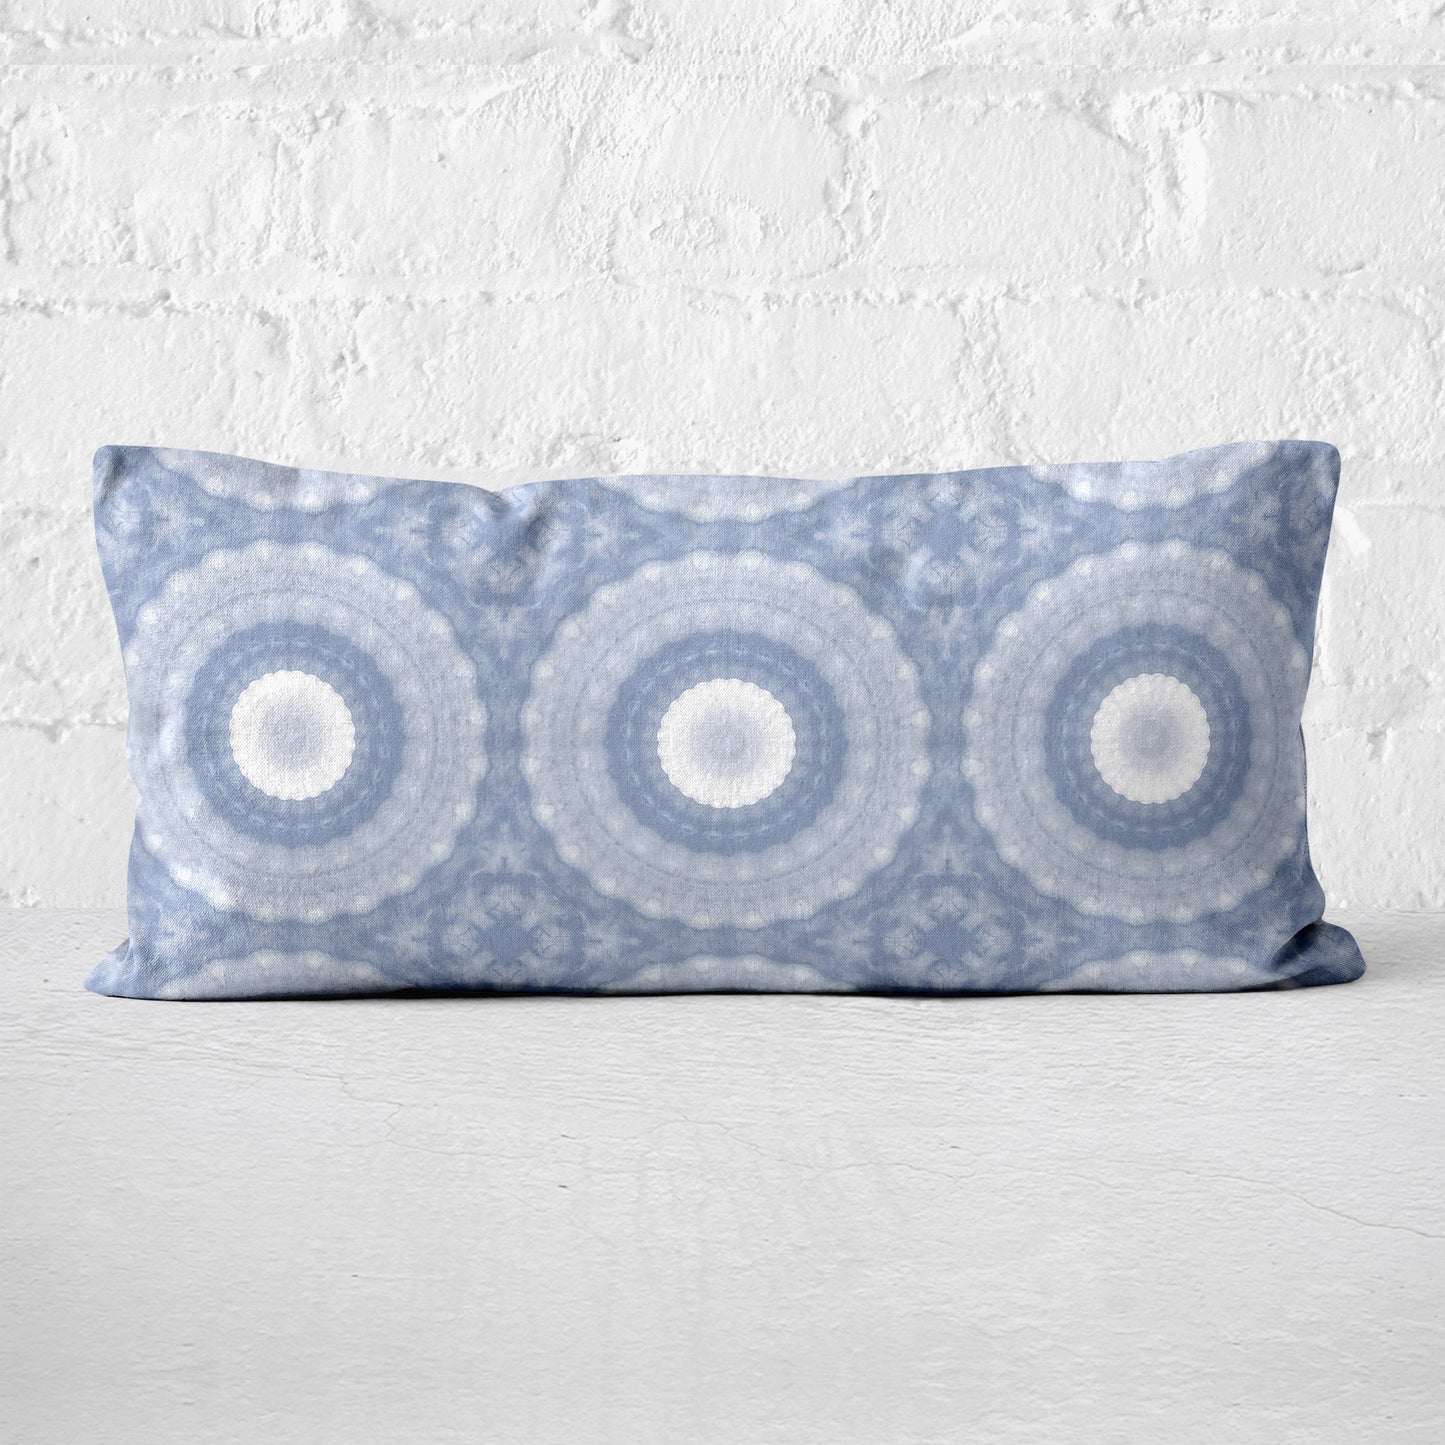 Lumbar pillow featuring a hand-painted circular pattern in periwinkle blue leaning against a white brick wall.